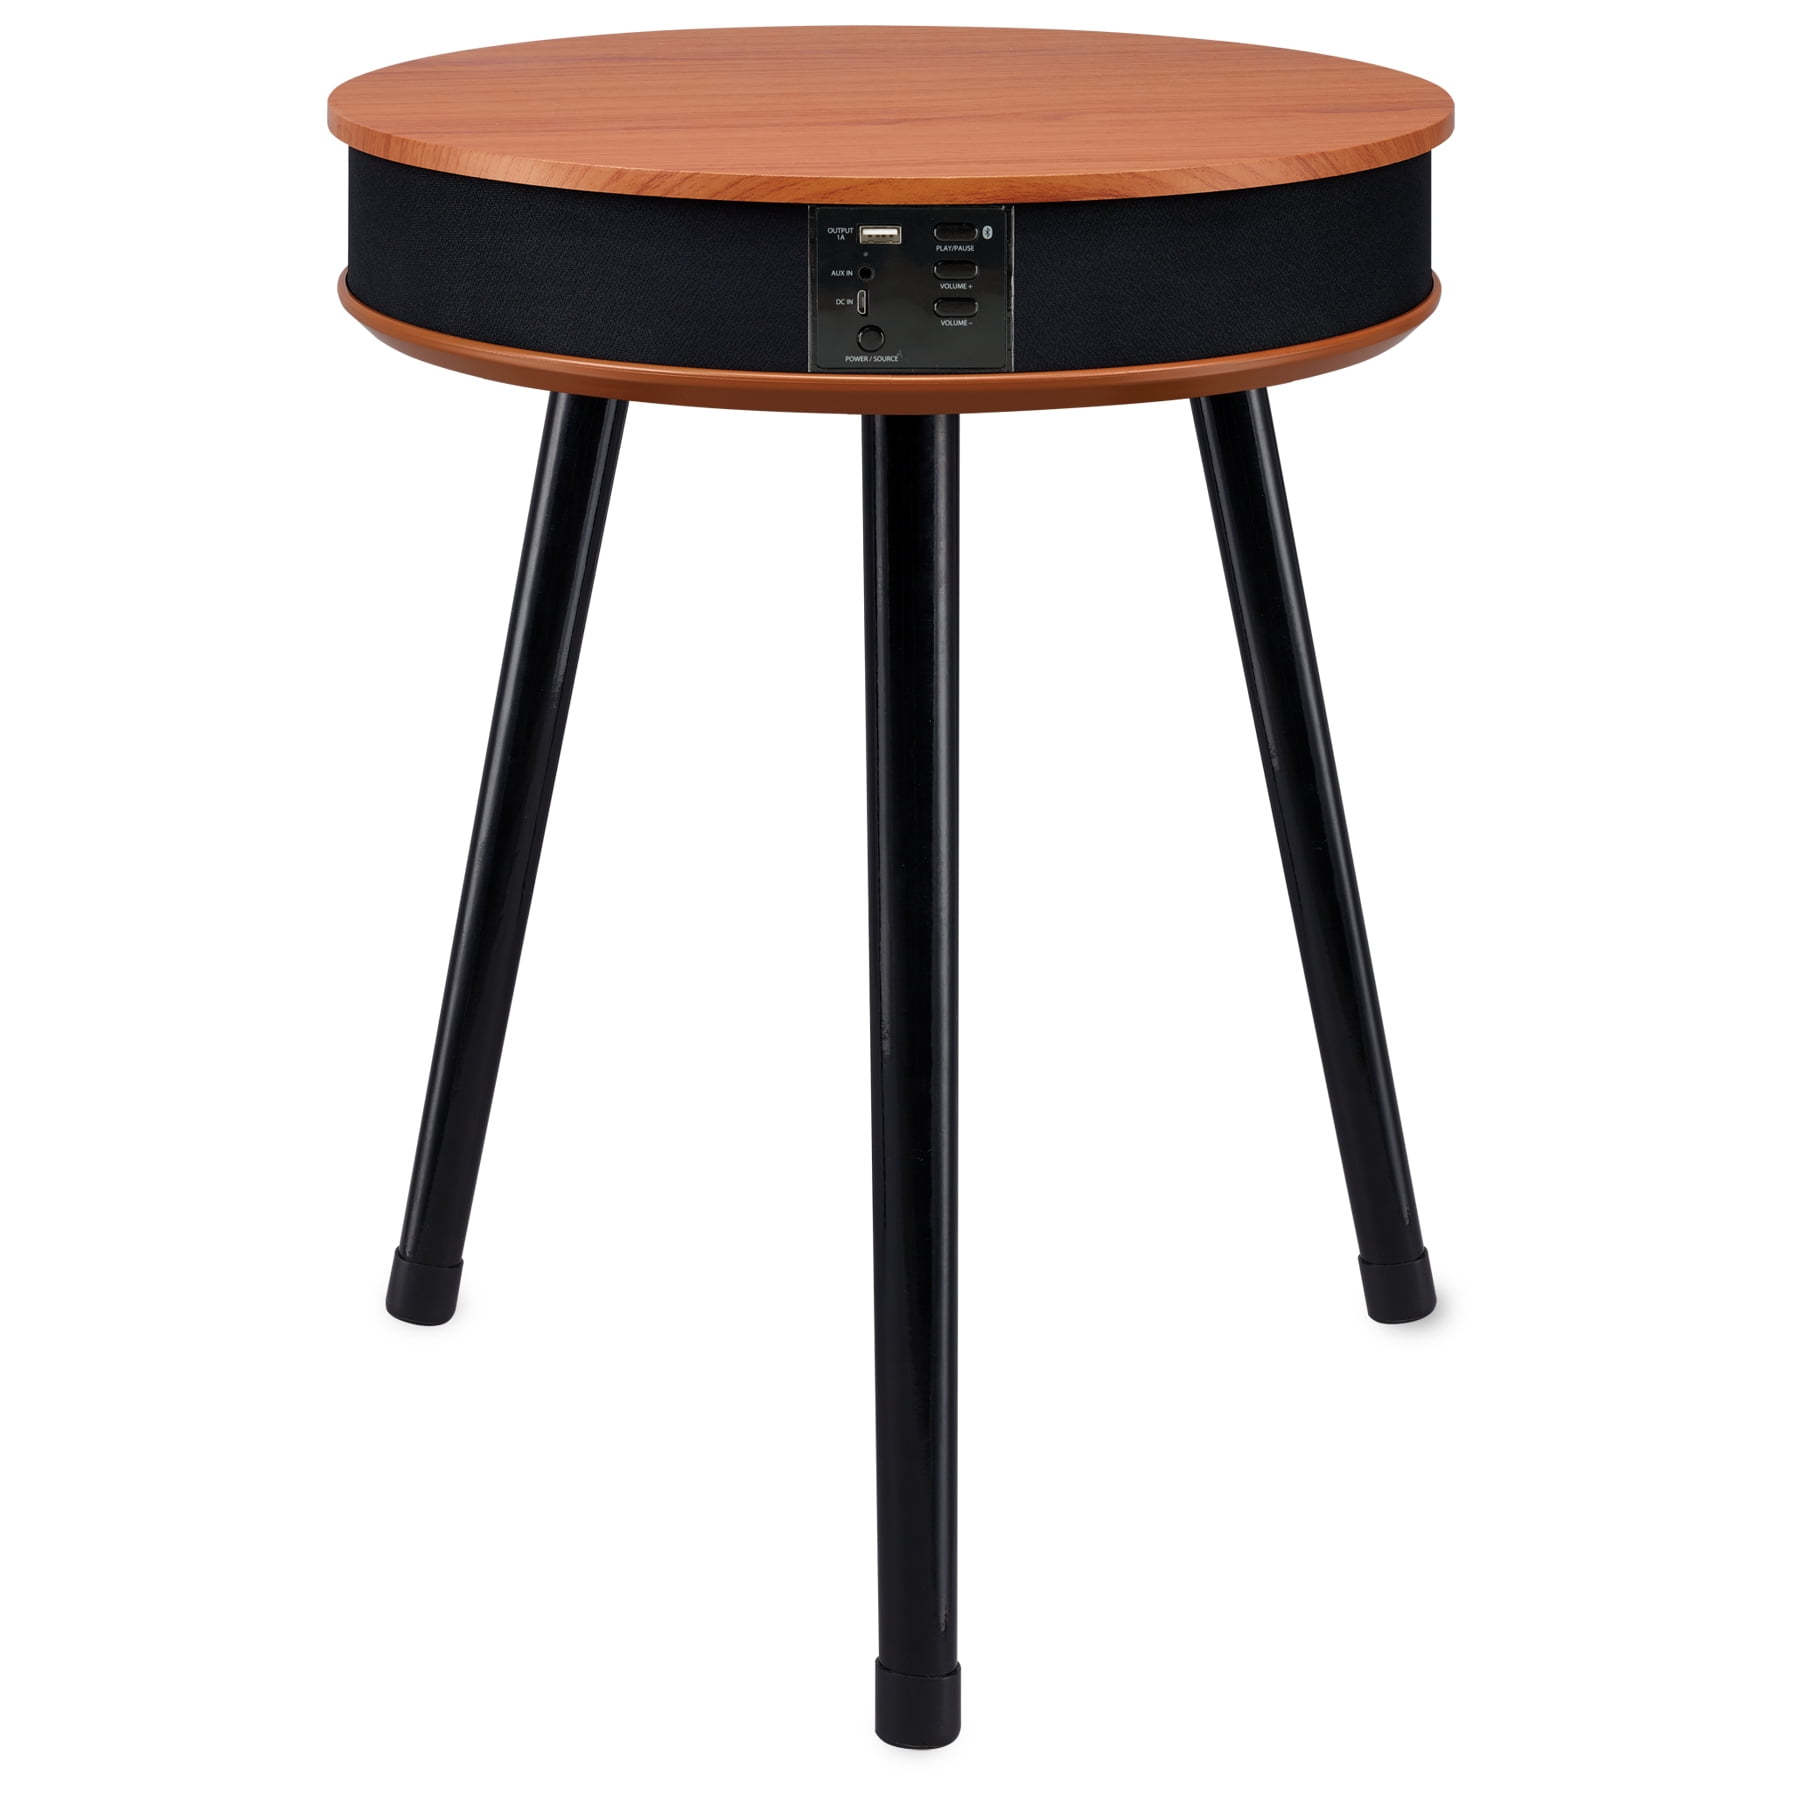 DecorTech Round End Table with Built-In Bluetooth Speaker and USB Charging Port, Walnut